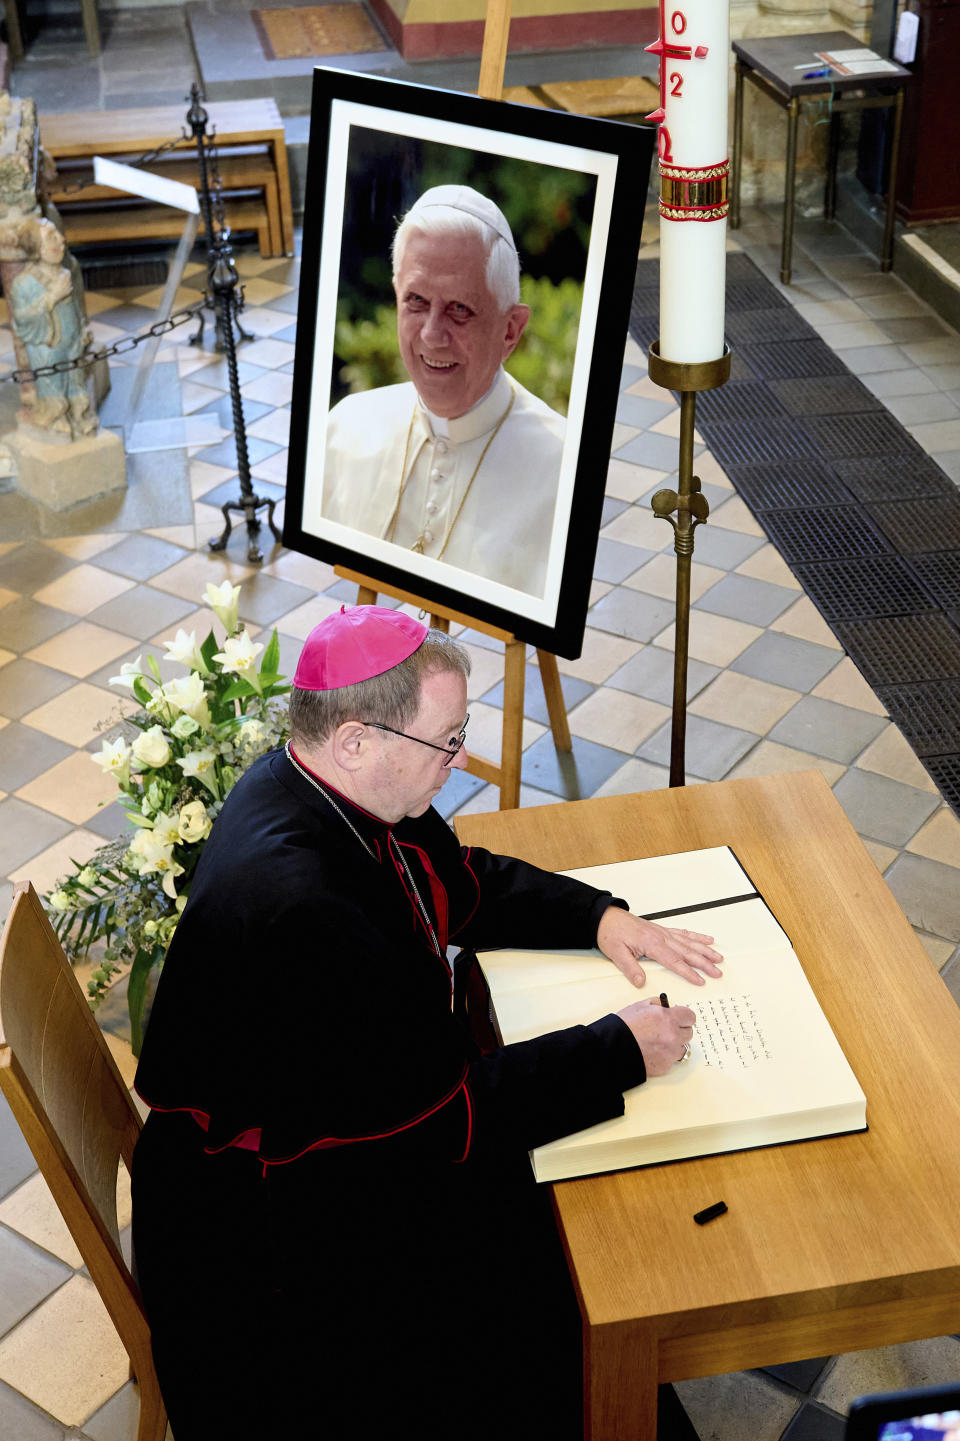 Bishop Georg Baetzing, head of the German Bishops' Conference, signs the book of condolence for Pope Emeritus Benedict at the Limburg Cathedral in Limburg, Germany, Saturday, Dec. 31, 2022. Pope Emeritus Benedict XVI, the German theologian who will be remembered as the first pope in 600 years to resign, has died, the Vatican announced Saturday. He was 95. (Thomas Frey/dpa via AP)